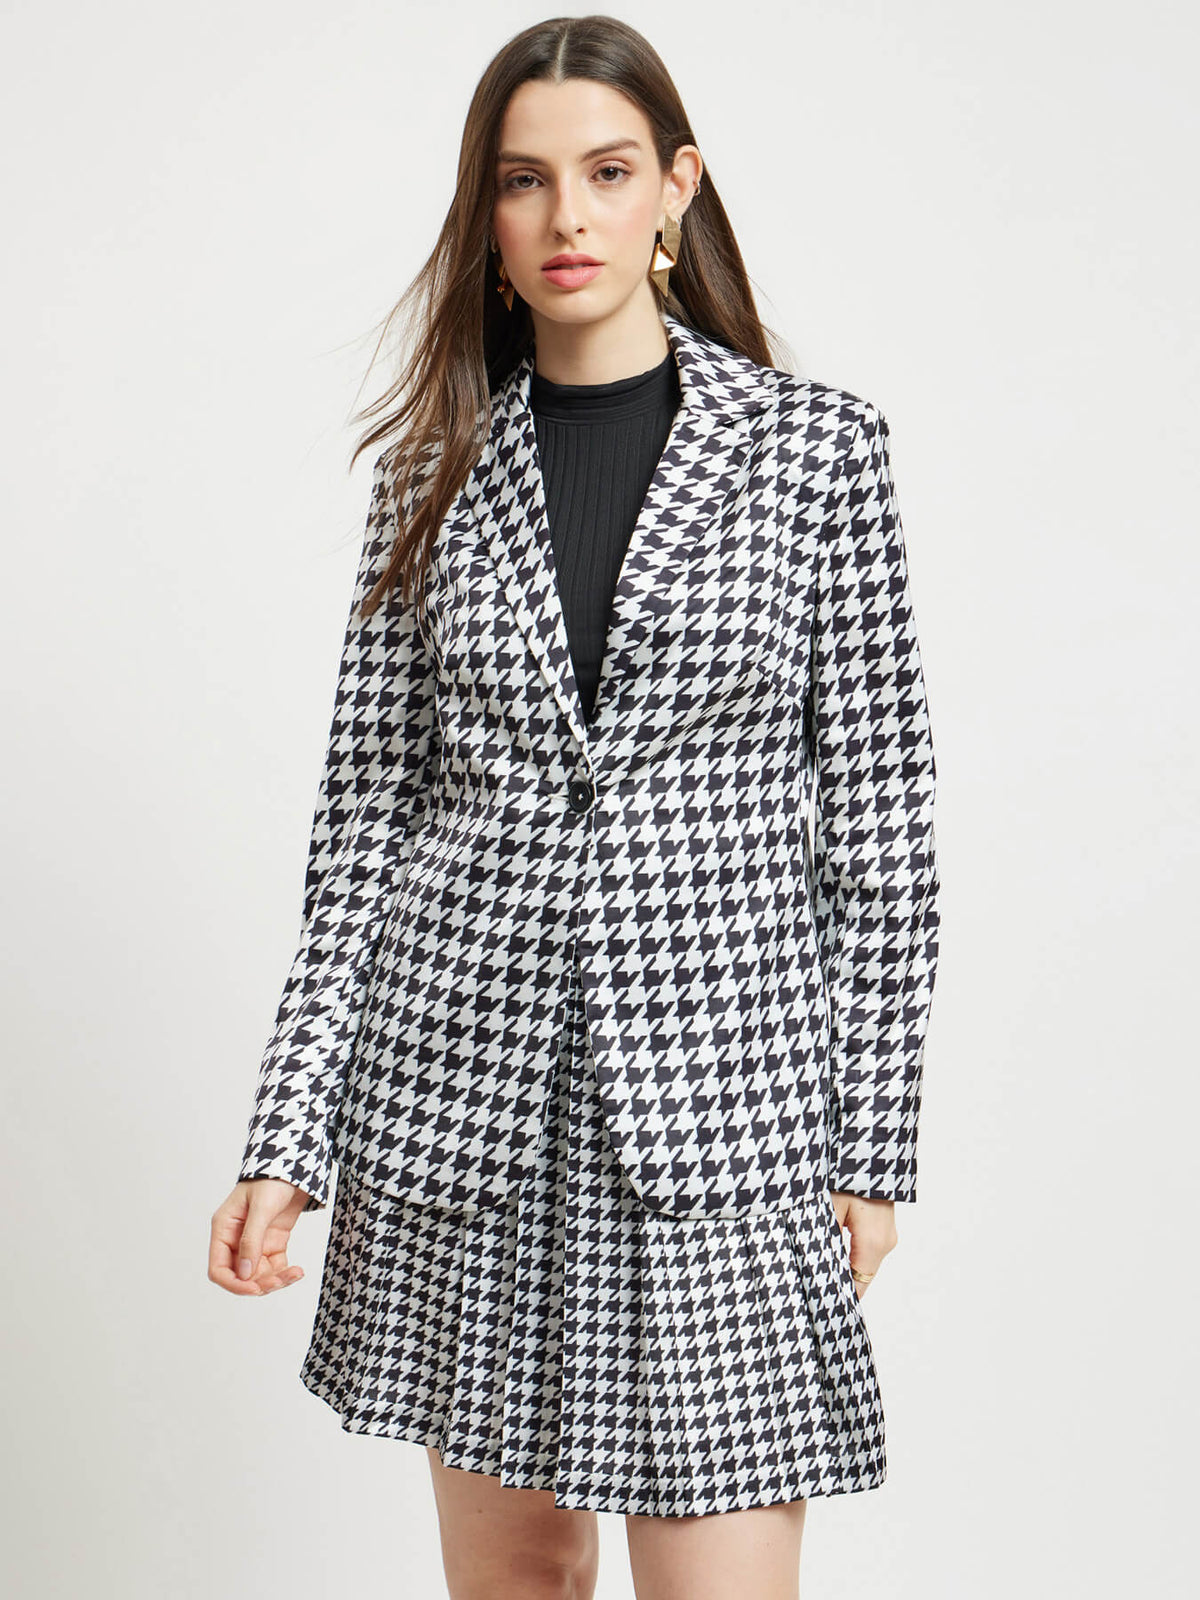 Houndstooth Print Blazer And Skirt Co-ord Set - White And Black